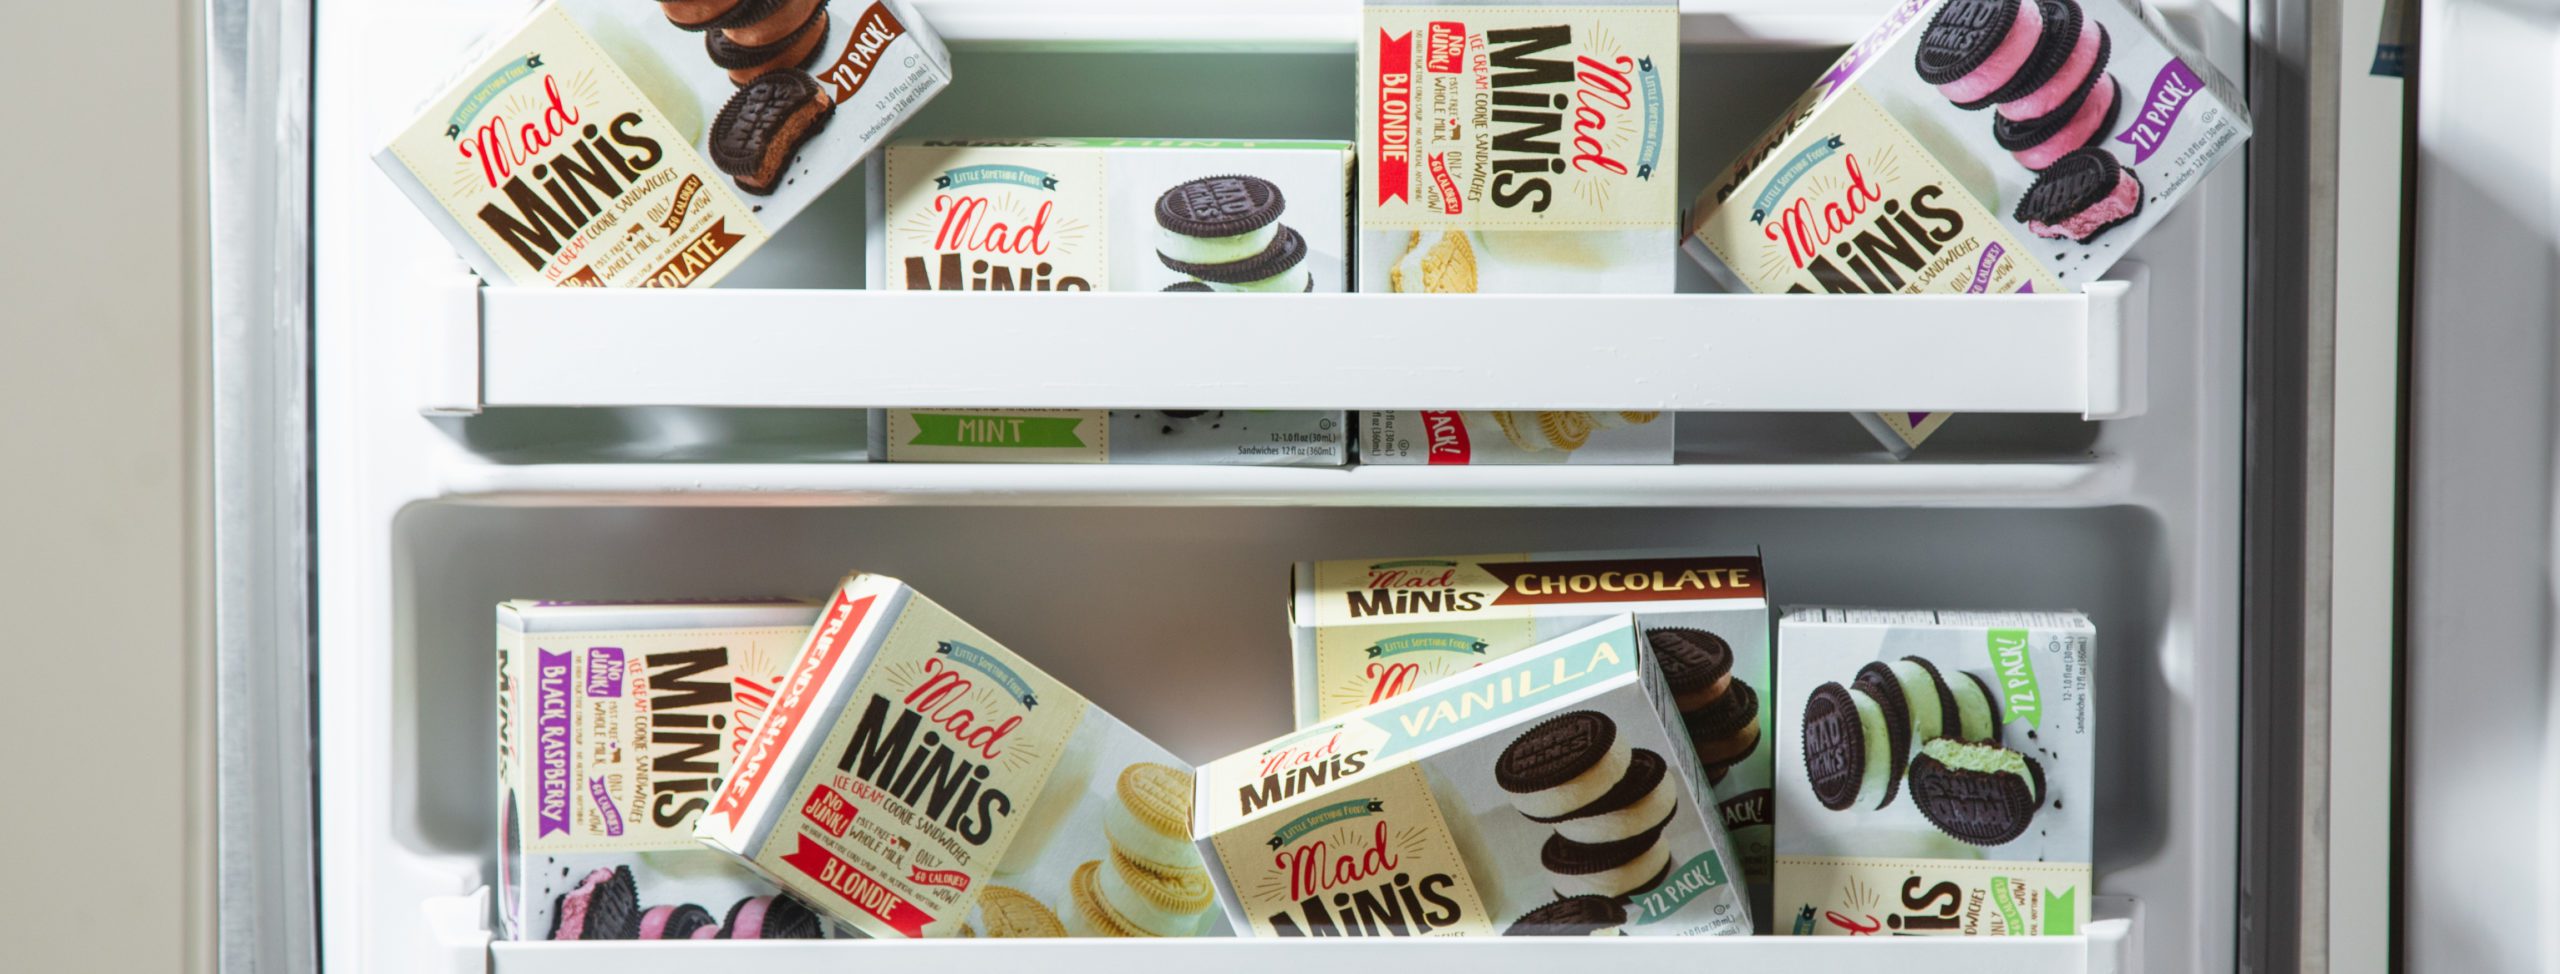 mad minis in the freezer image